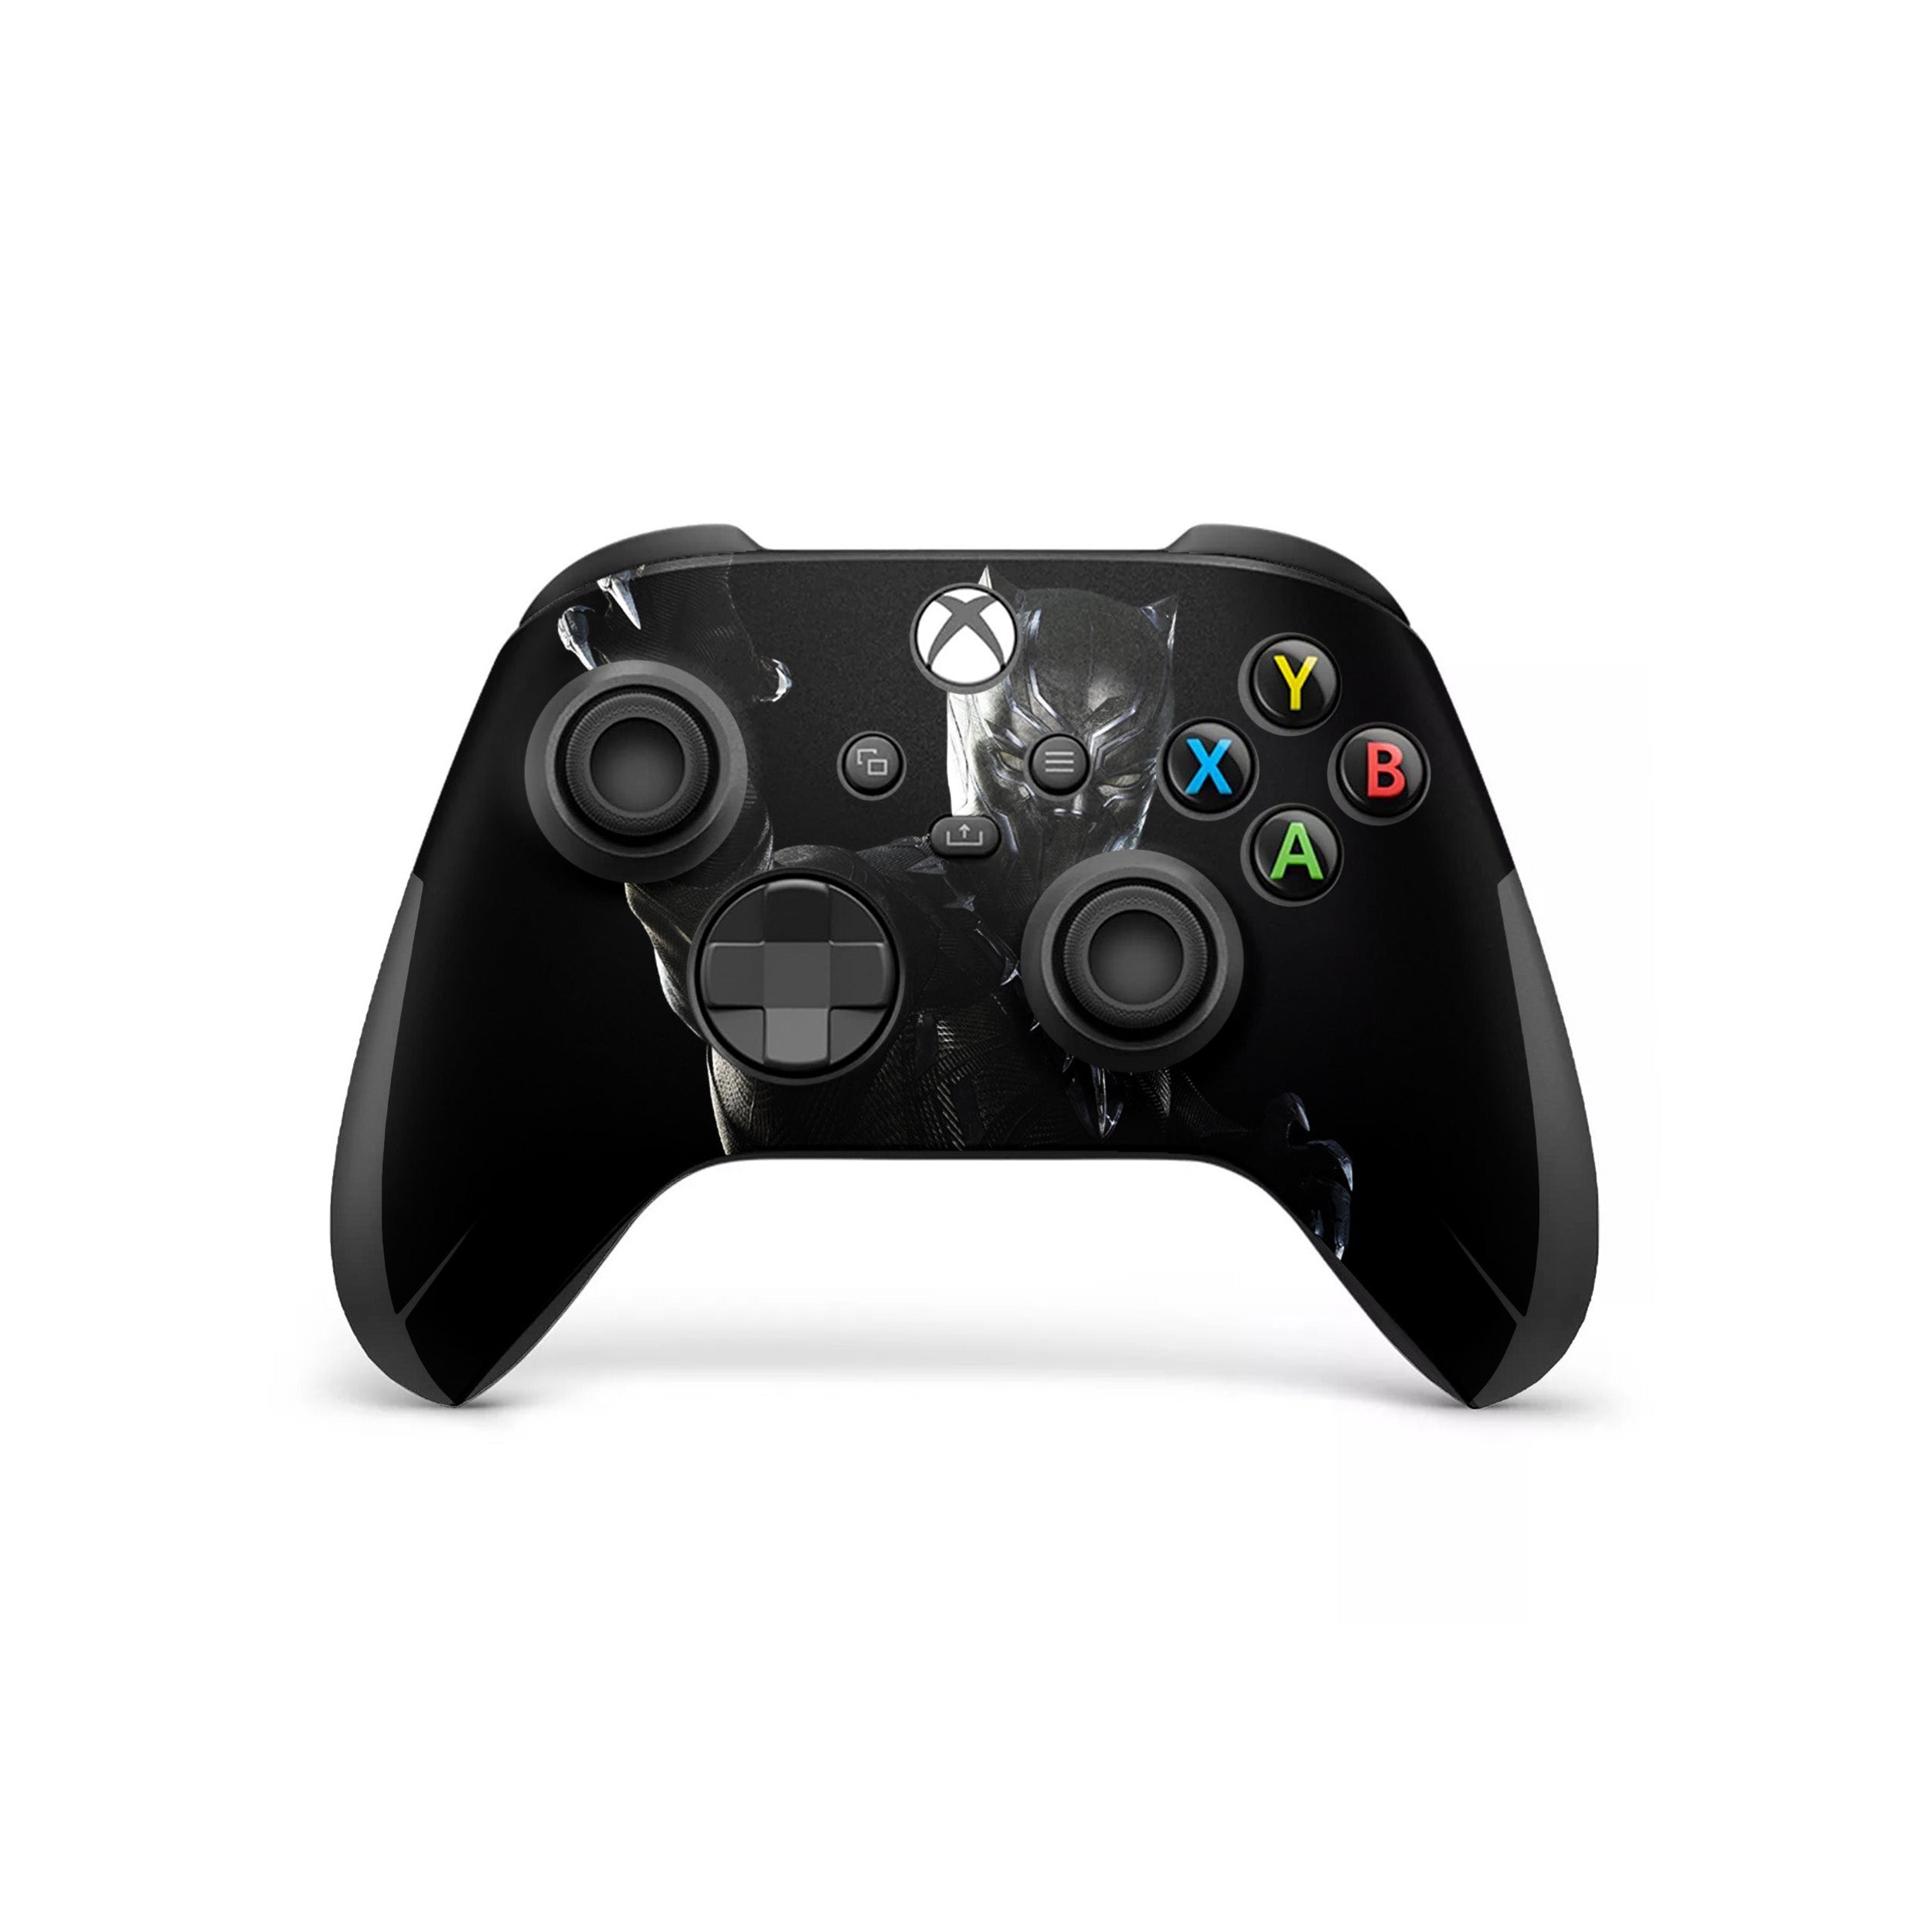 A video game skin featuring a Marvel Black Panther design for the Xbox Wireless Controller.